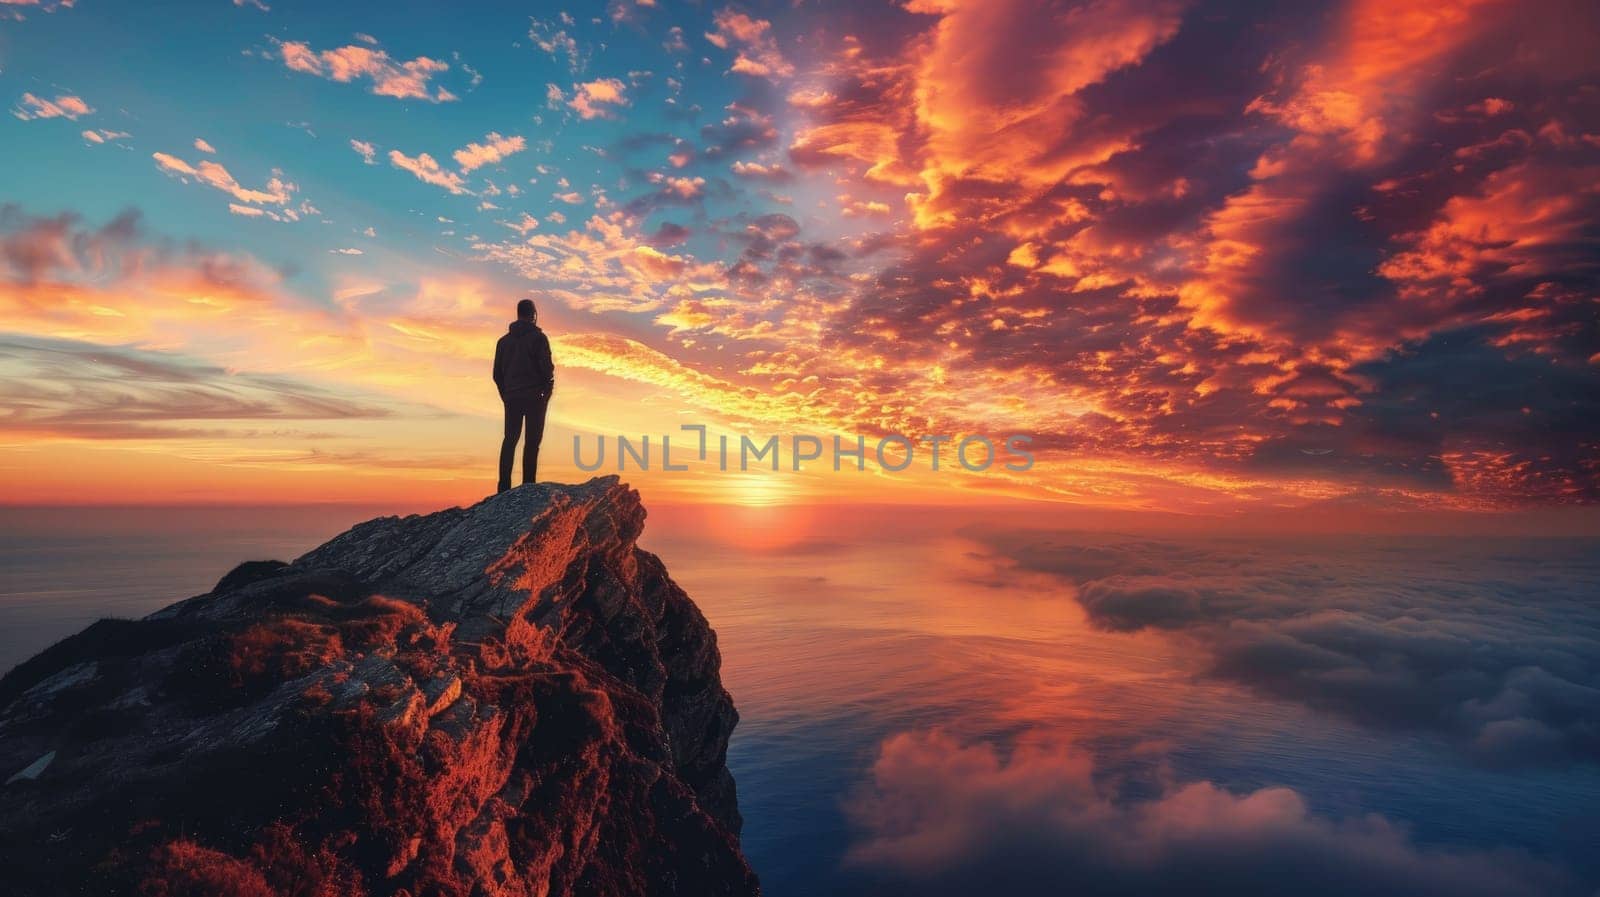 A man stands on a rocky cliff overlooking a body of water with a beautiful sunset in the background. Concept of solitude and contemplation, as the man gazes out at the horizon